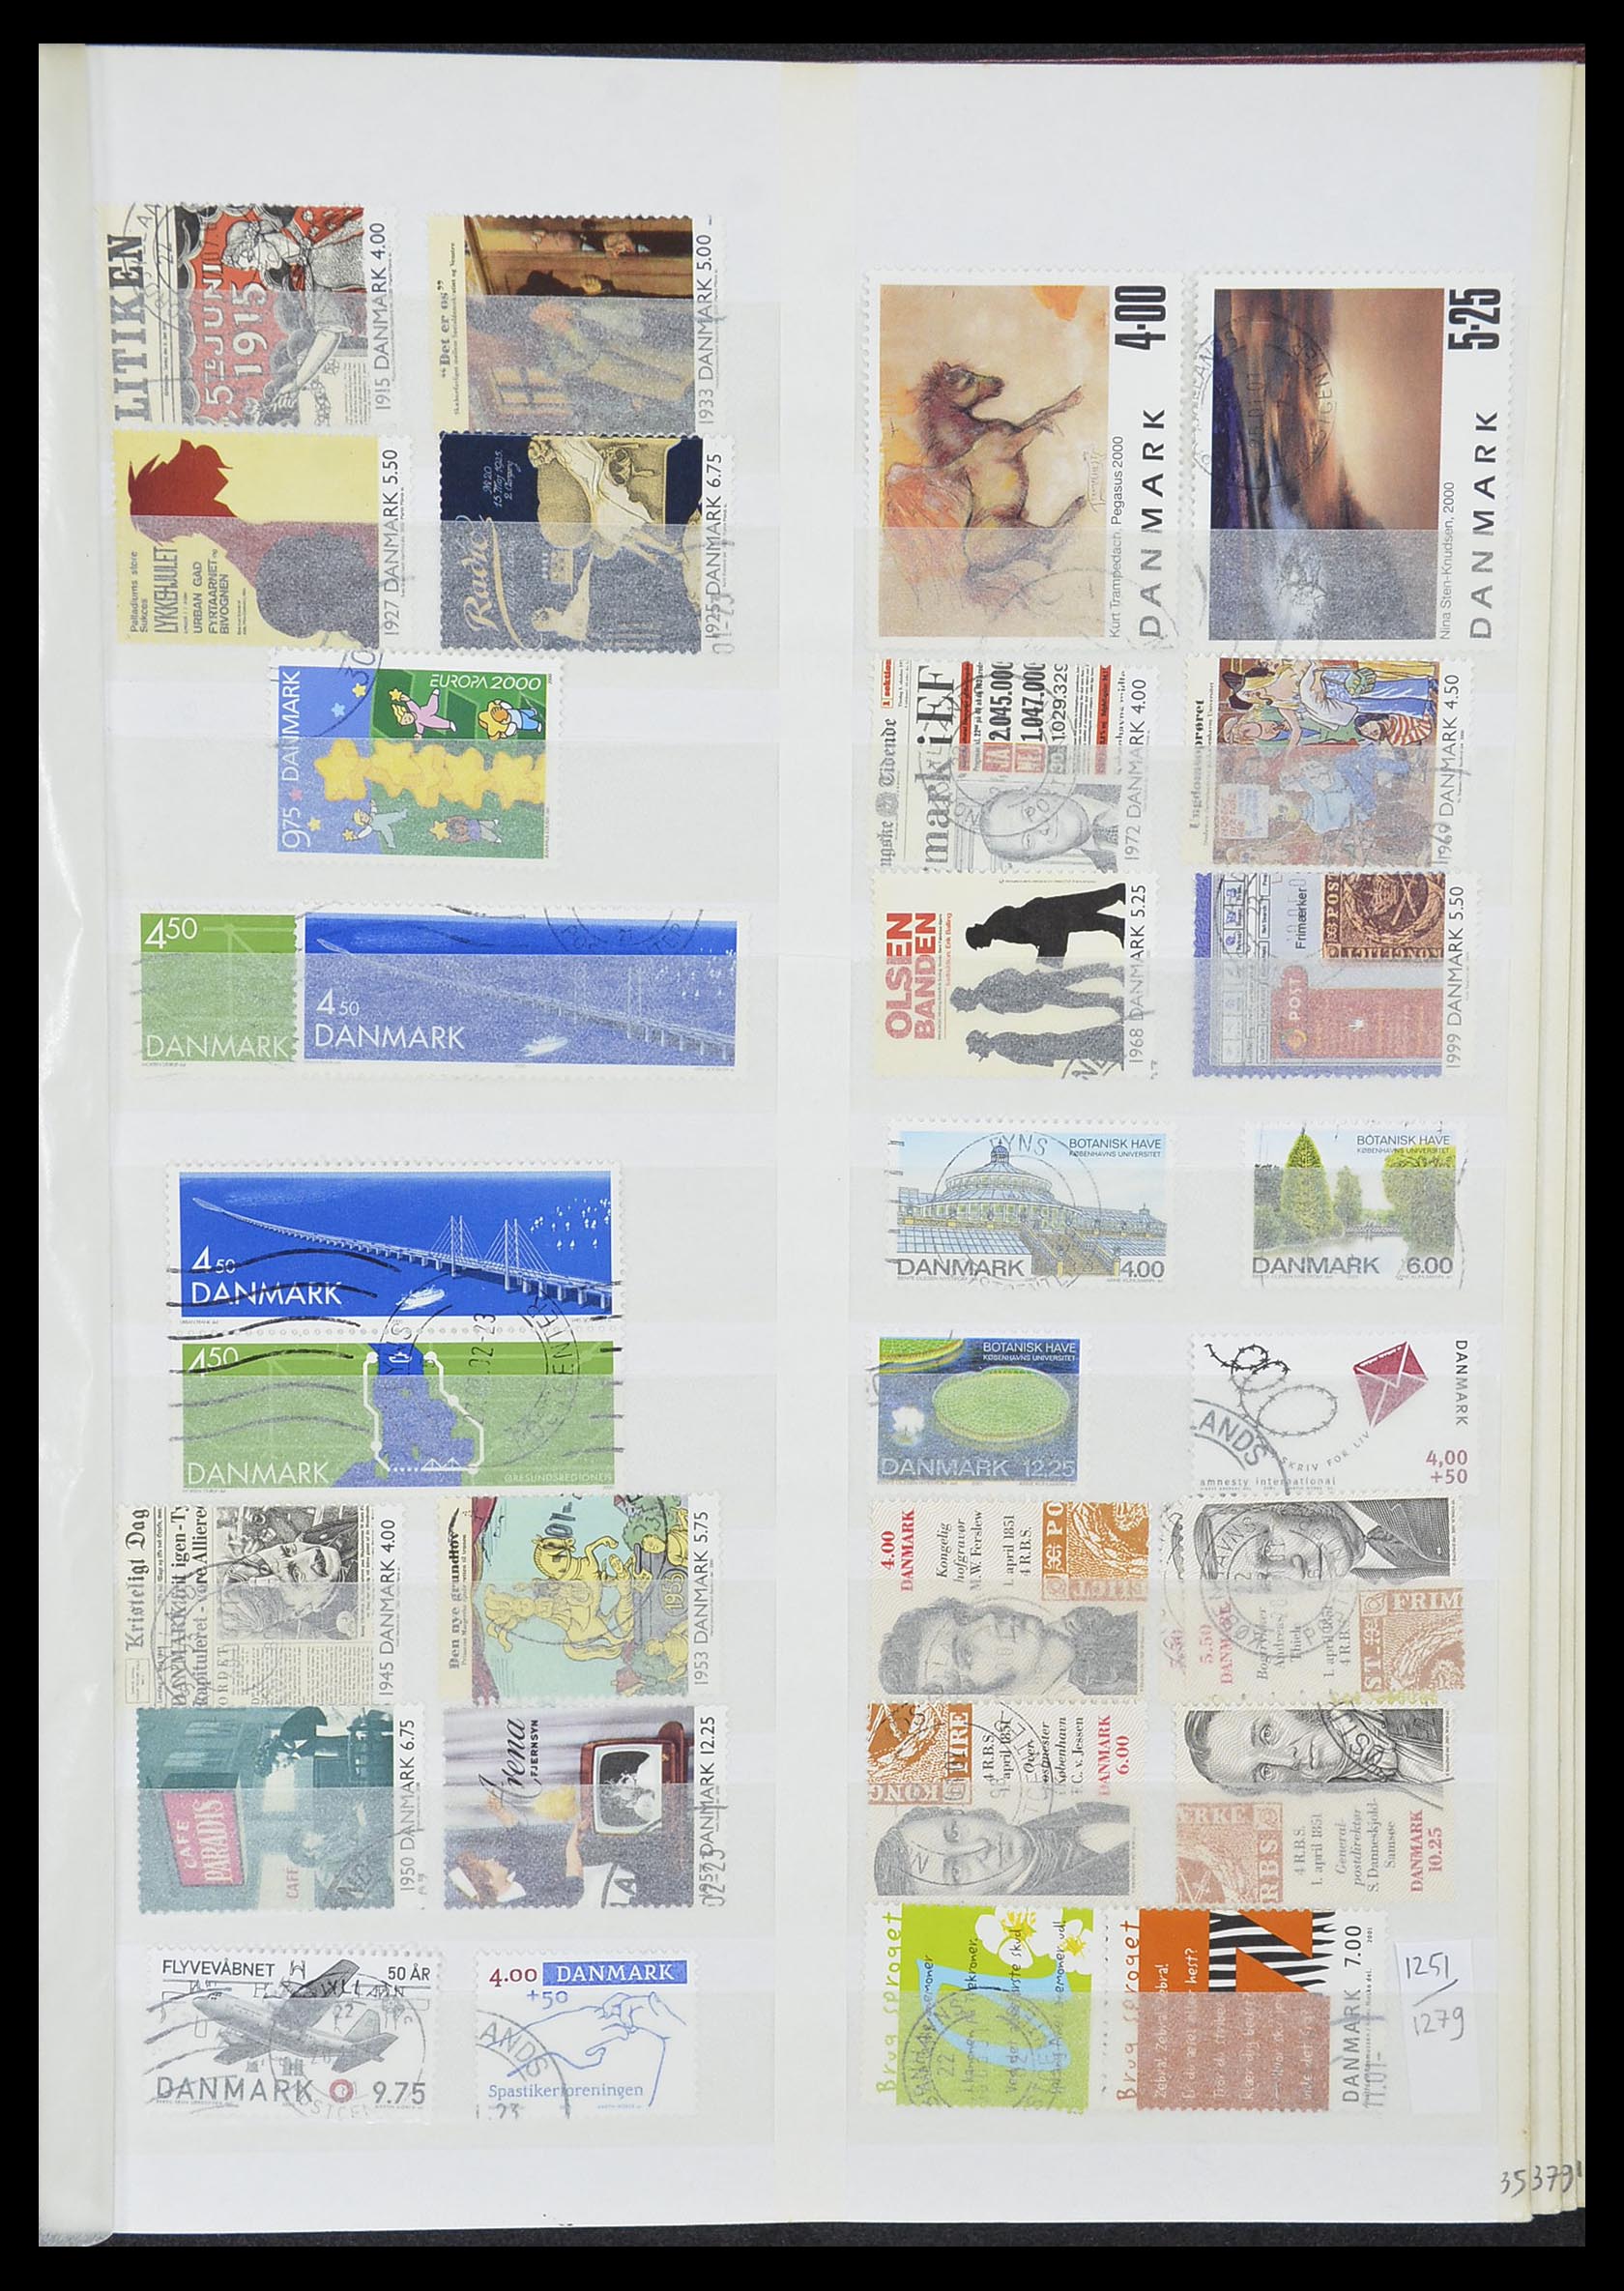 33376 035 - Stamp collection 33376 Denmark 1851-2007.